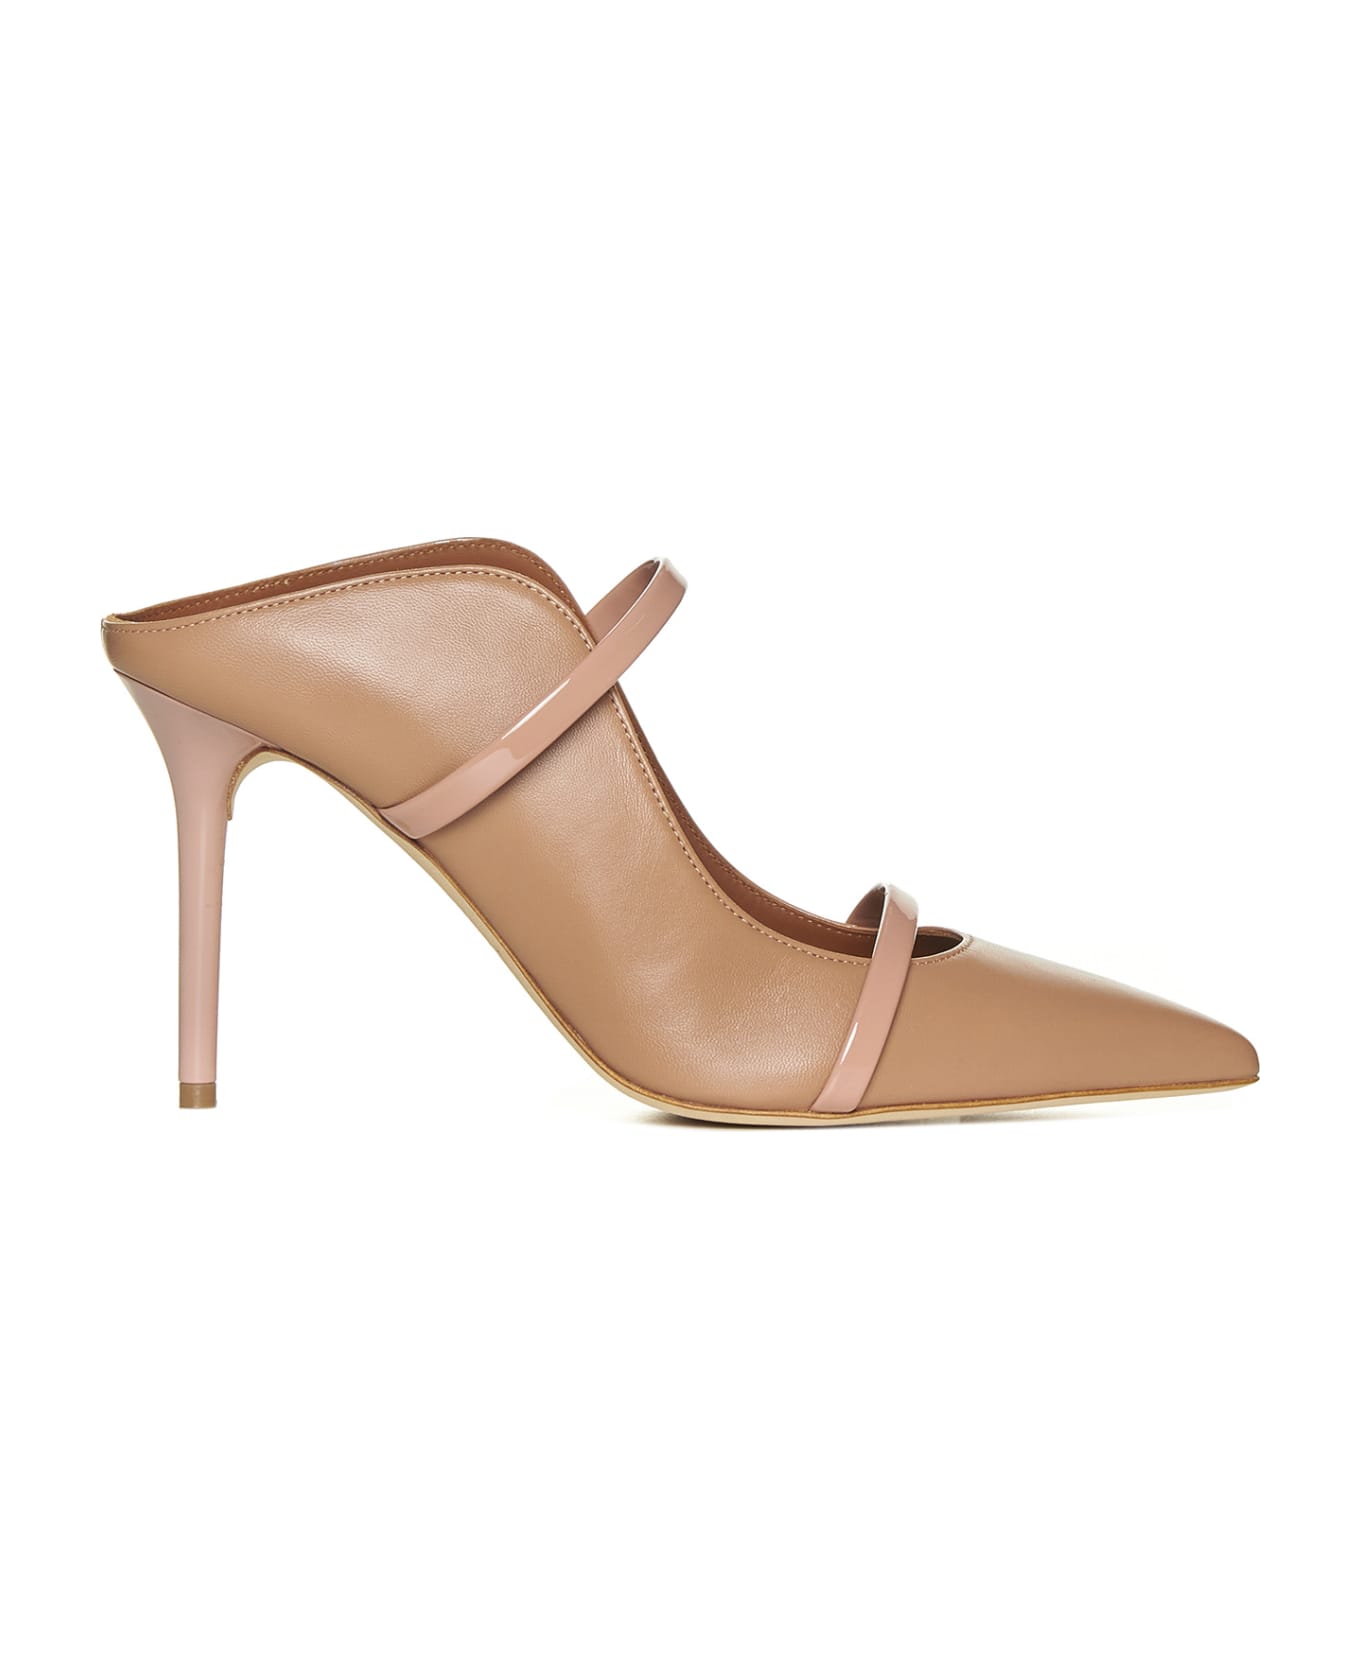 Malone Souliers Flat Shoes - Nude/blush nud